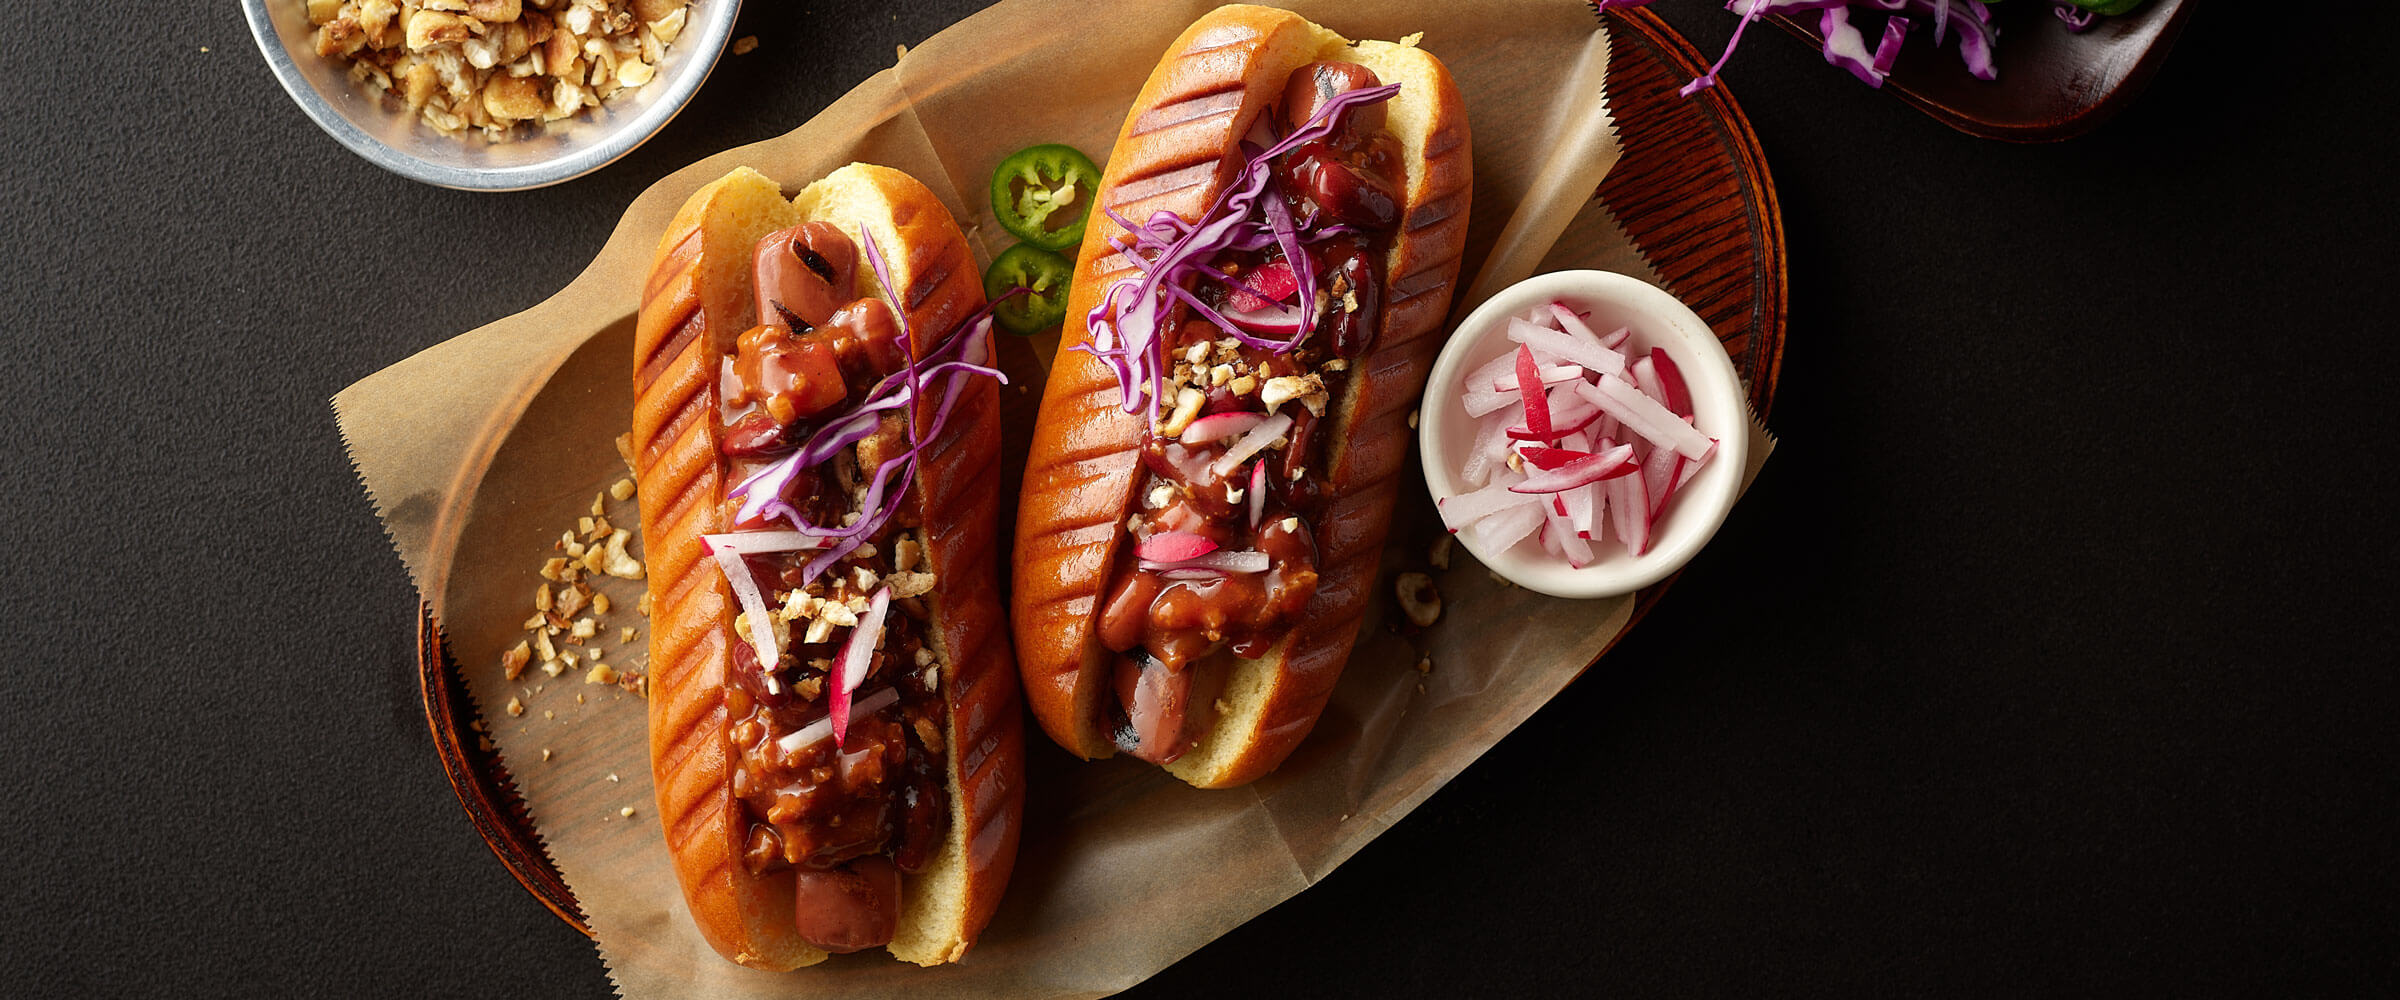 Plant-Based Chili Dogs with onion and slaw topping on wooden platter